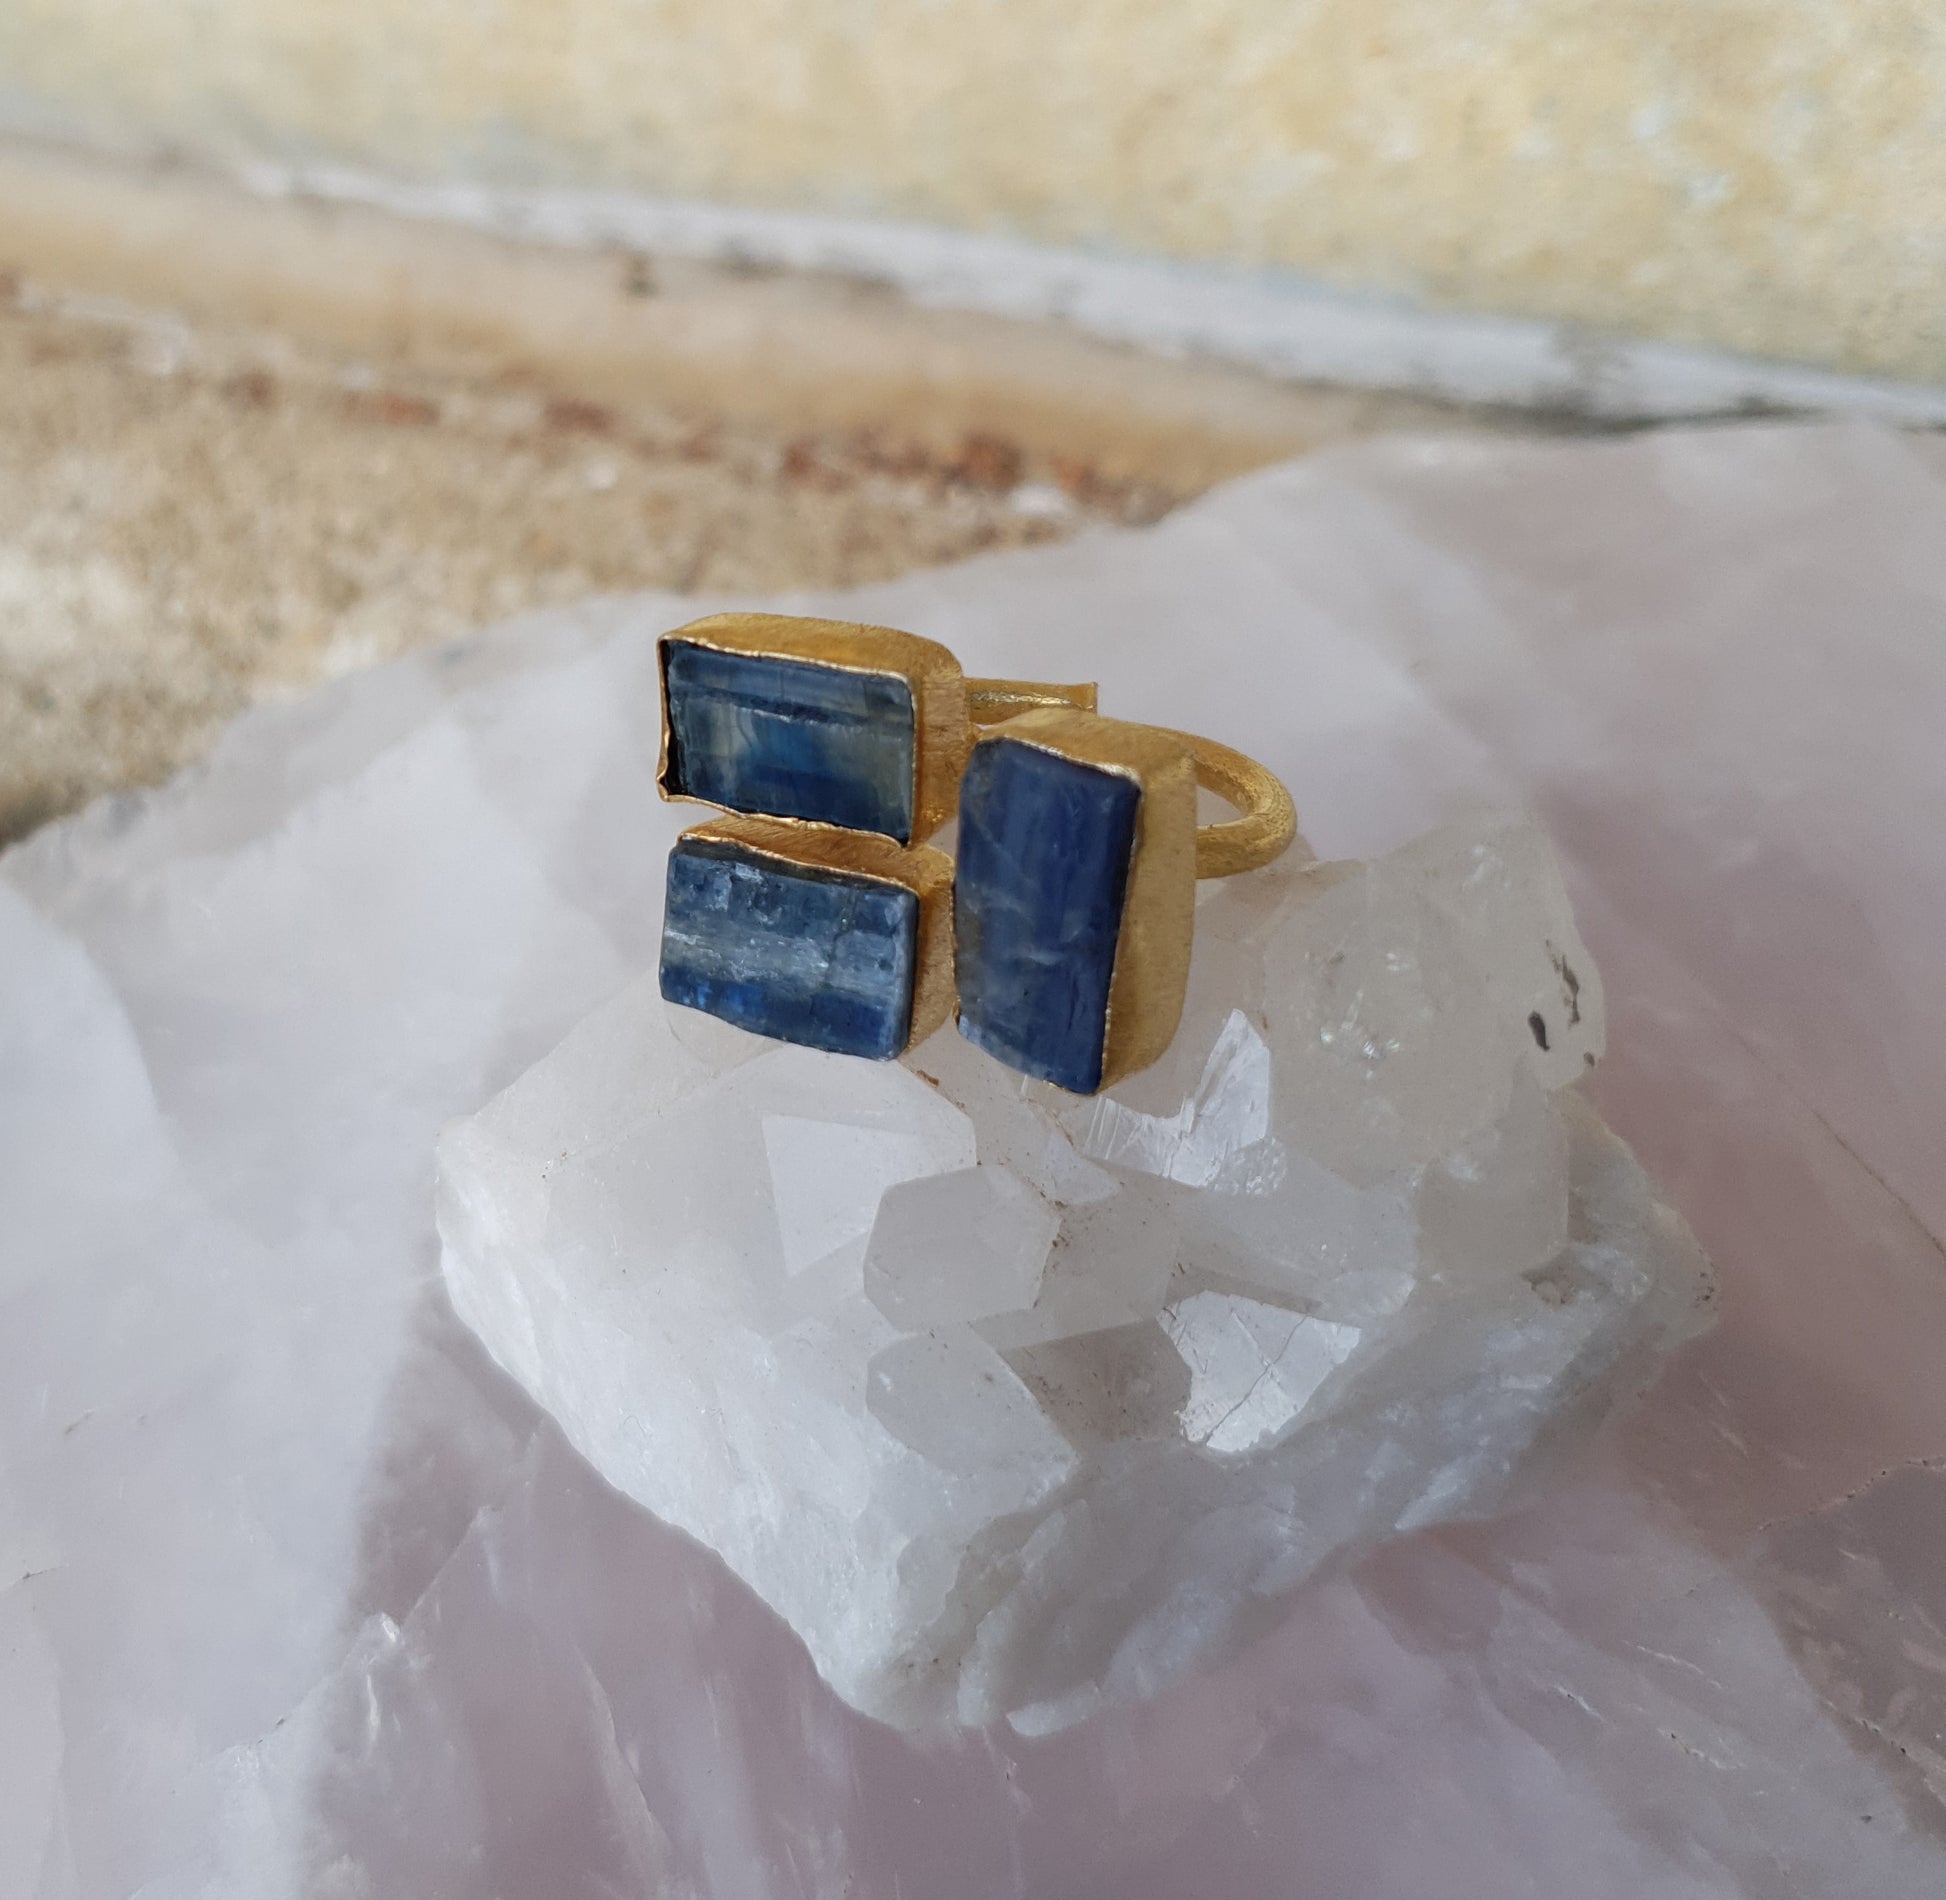 A large gold ring with a triple setting of blue kyanite